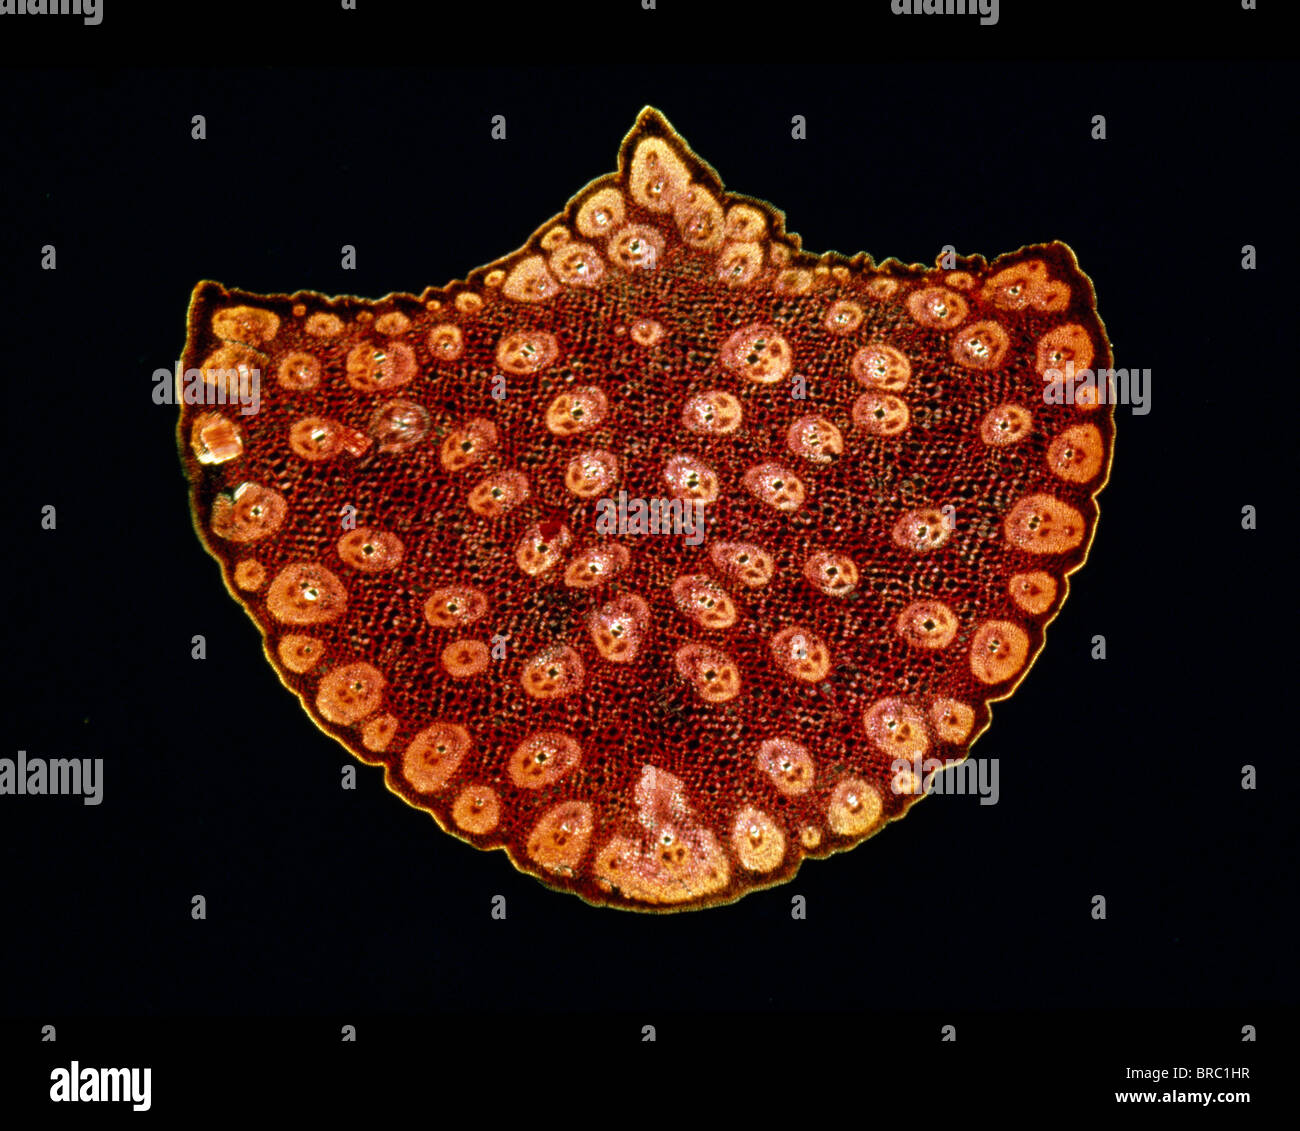 Light Micrograph (LM) of a transverse section of a stem of a Palm, magnification x12 Stock Photo